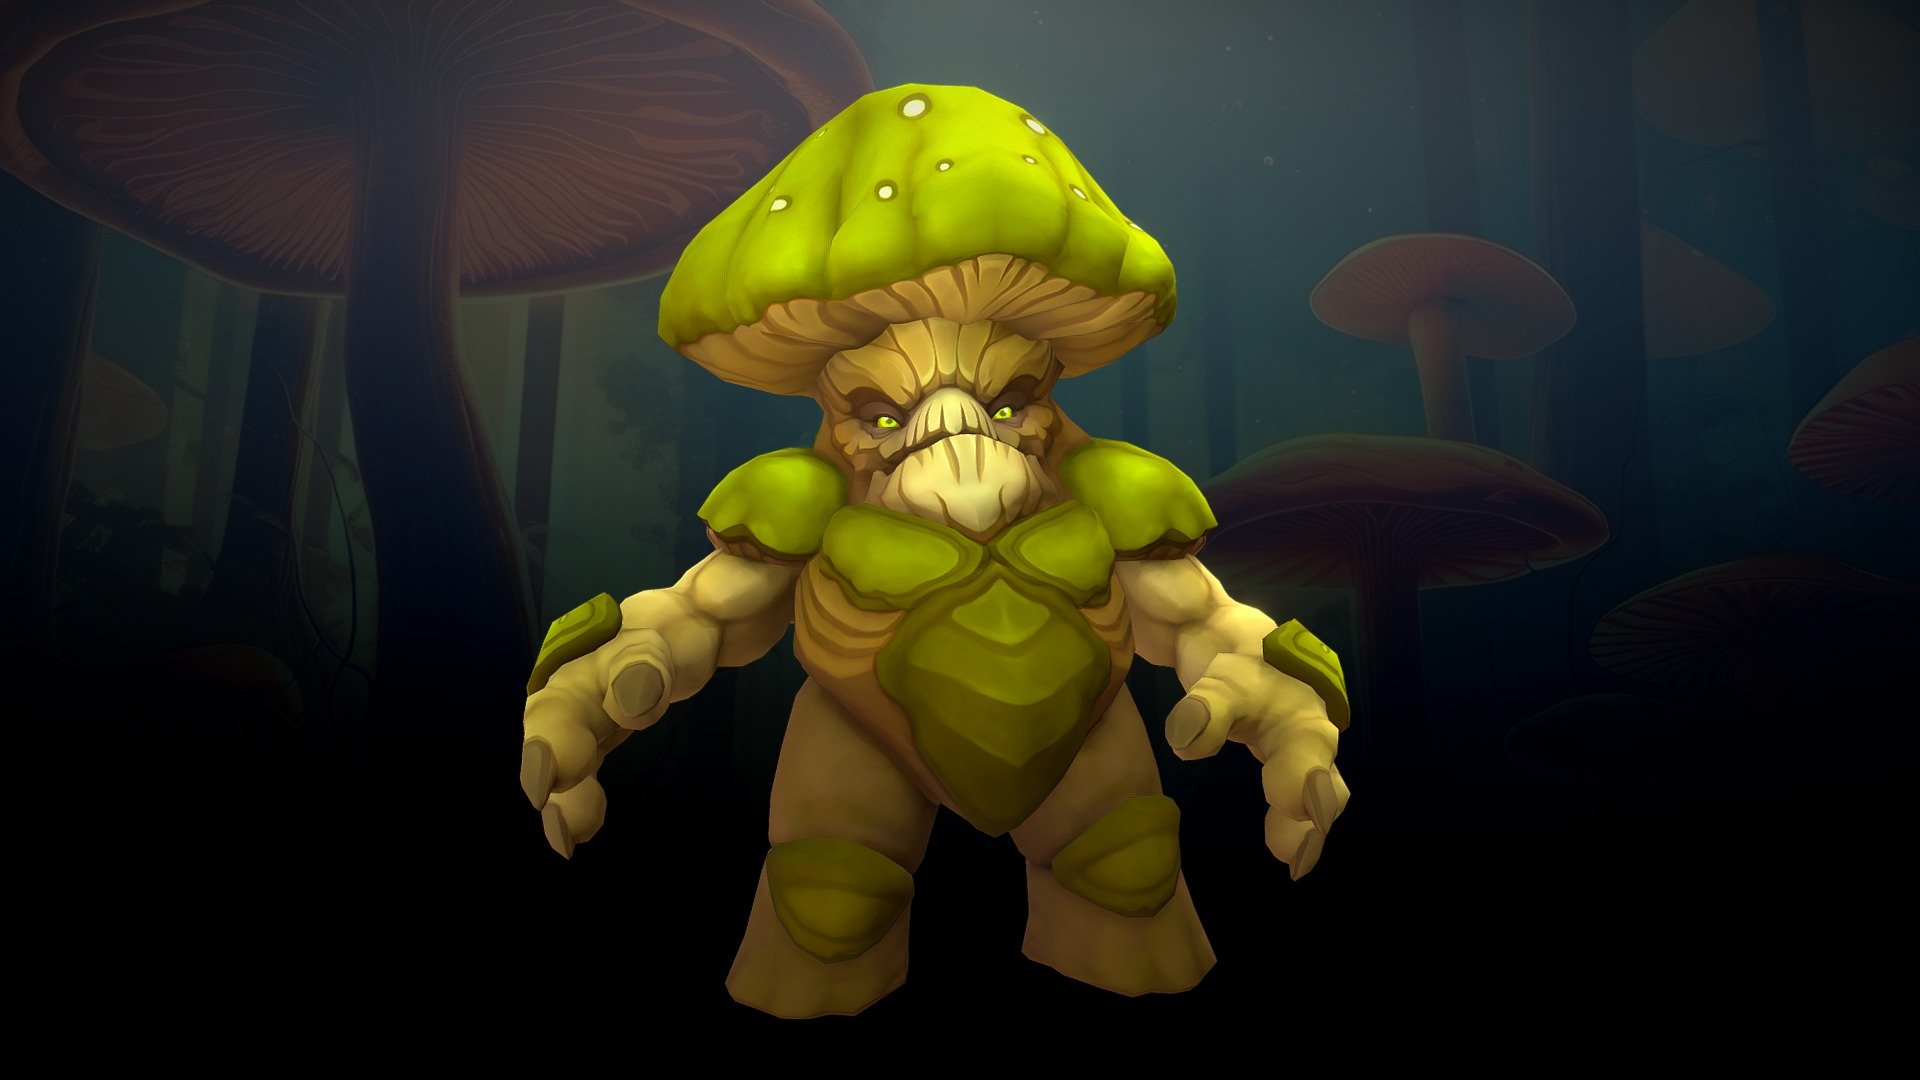 Stylized character for a project.

Software used: Zbrush, Autodesk Maya, Autodesk 3ds Max, Substance Painter - Stylized Mushroom Guardian - 3D model by N-hance Studio (@Malice6731) 3d model